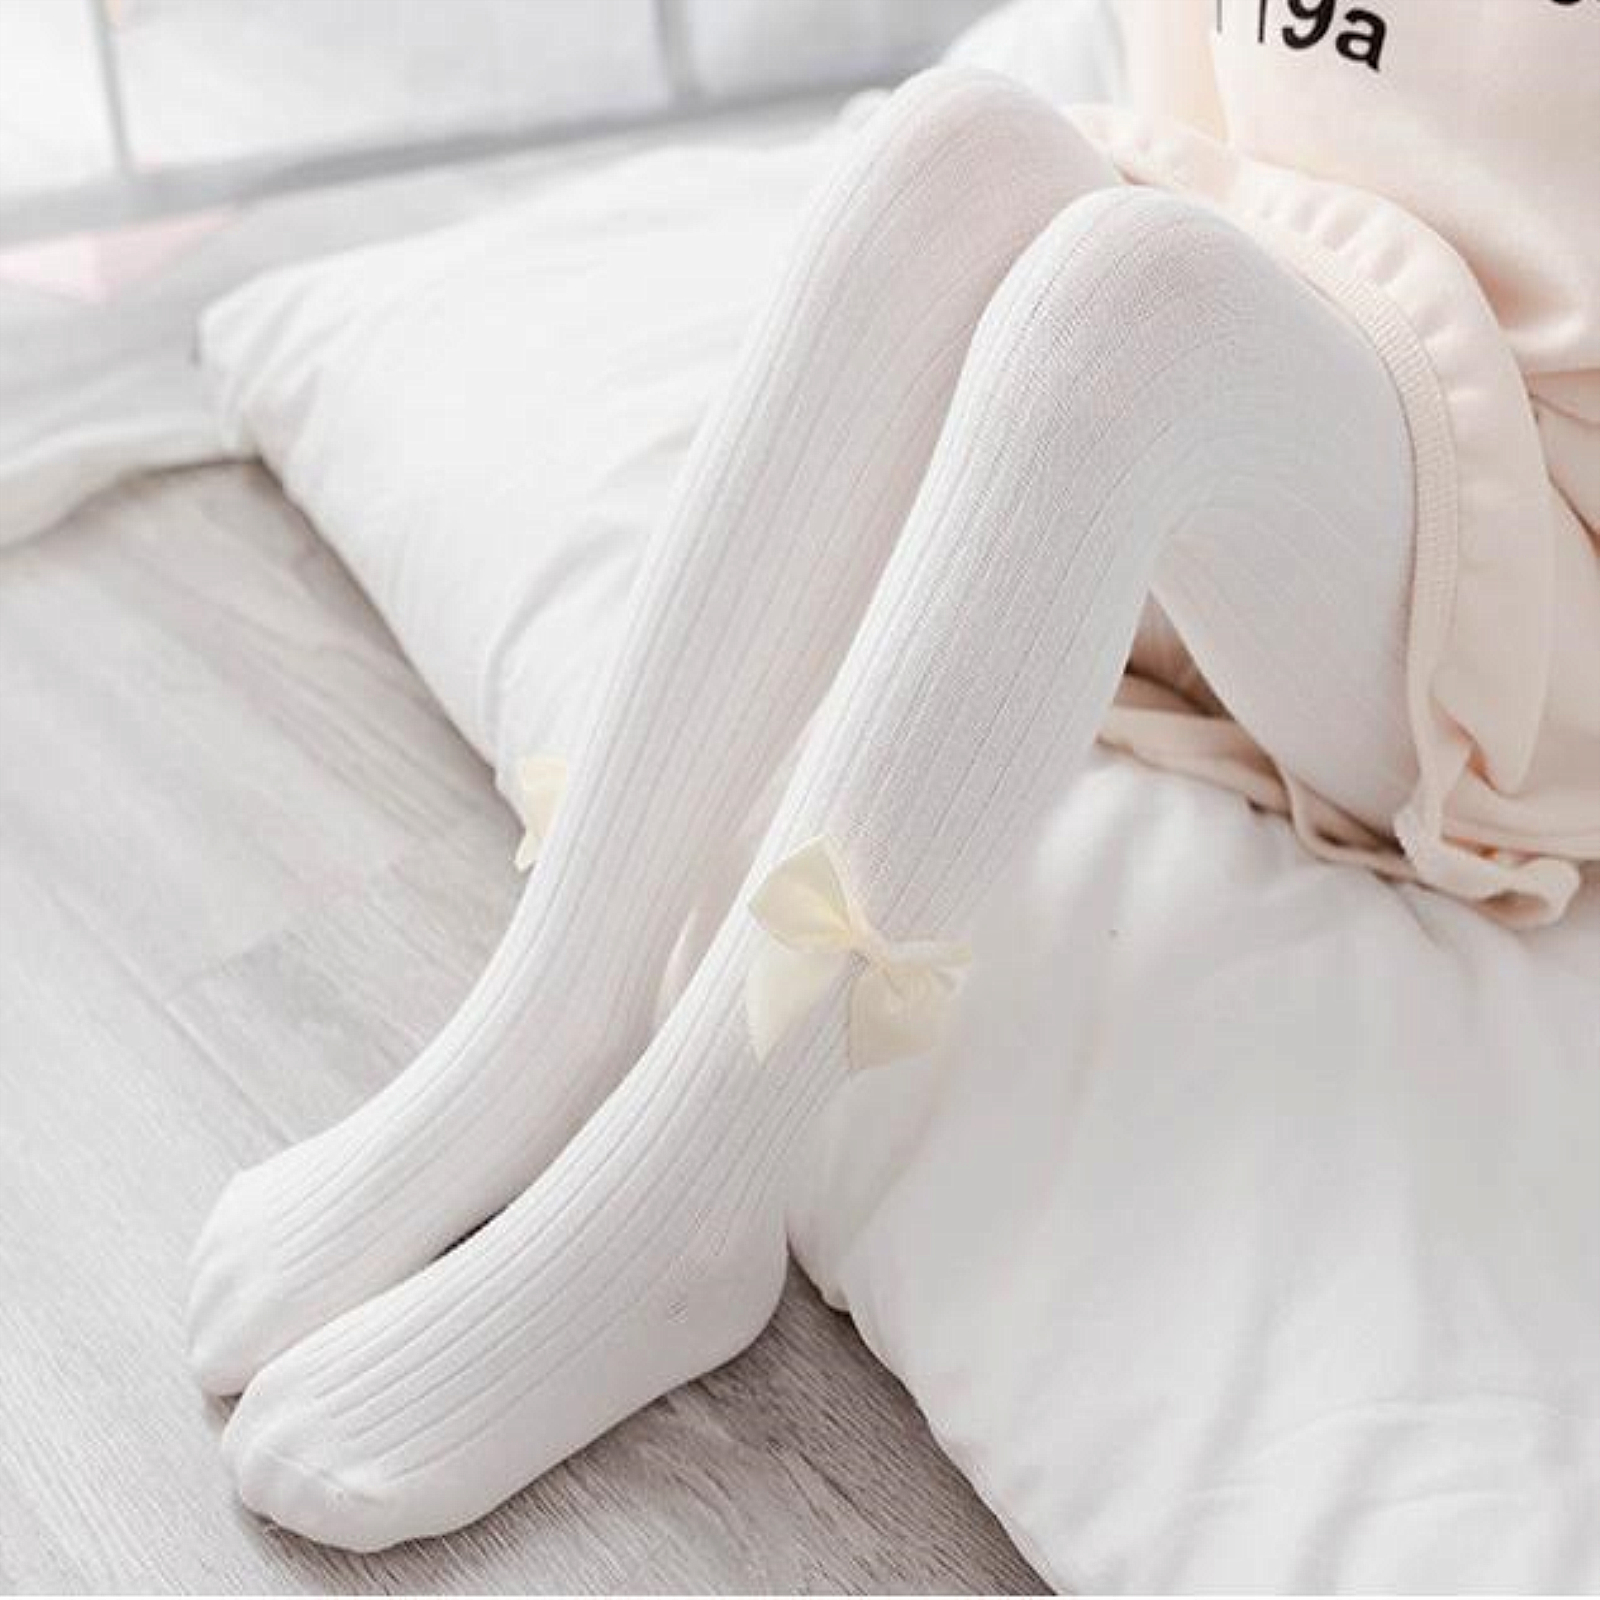 Baby Girl Tights Thick Cable Knit Leggings Stockings Cotton